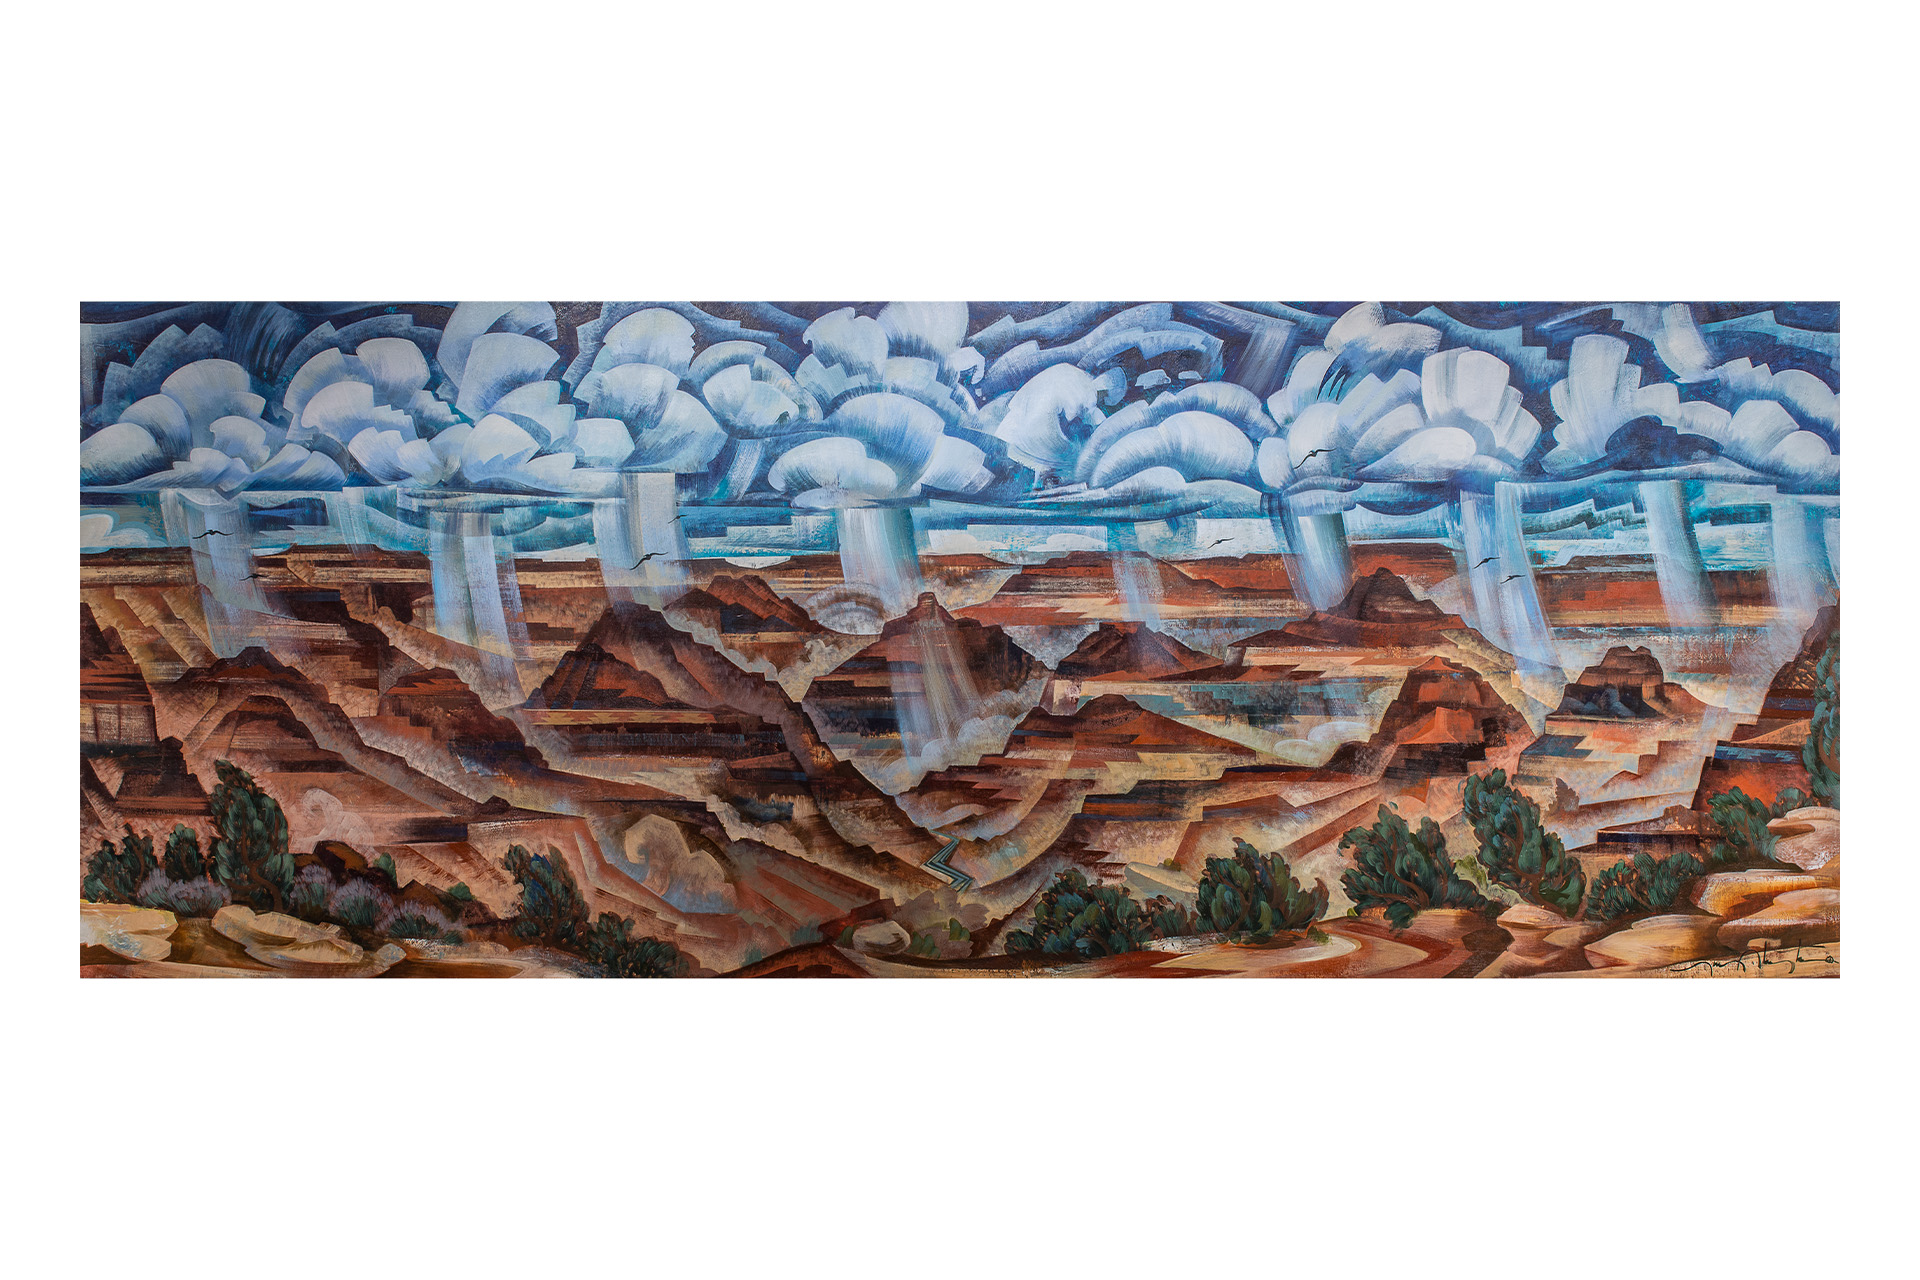 A painting of mountains and the Grand Canyon with rain pouring down from blue and white clouds.